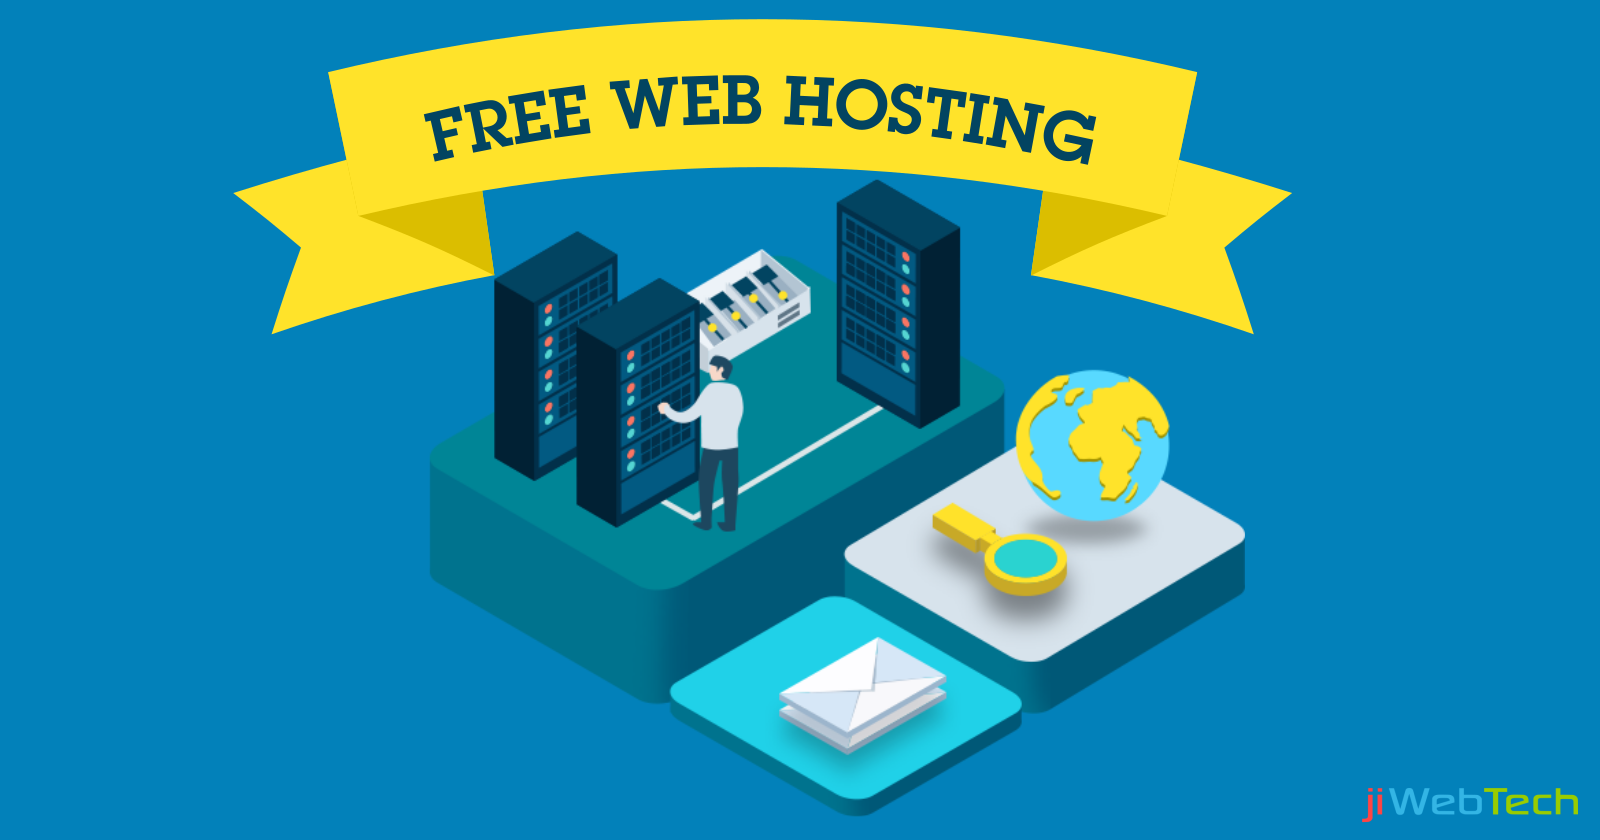 Consider This Guide Before Using Free Web Hosting